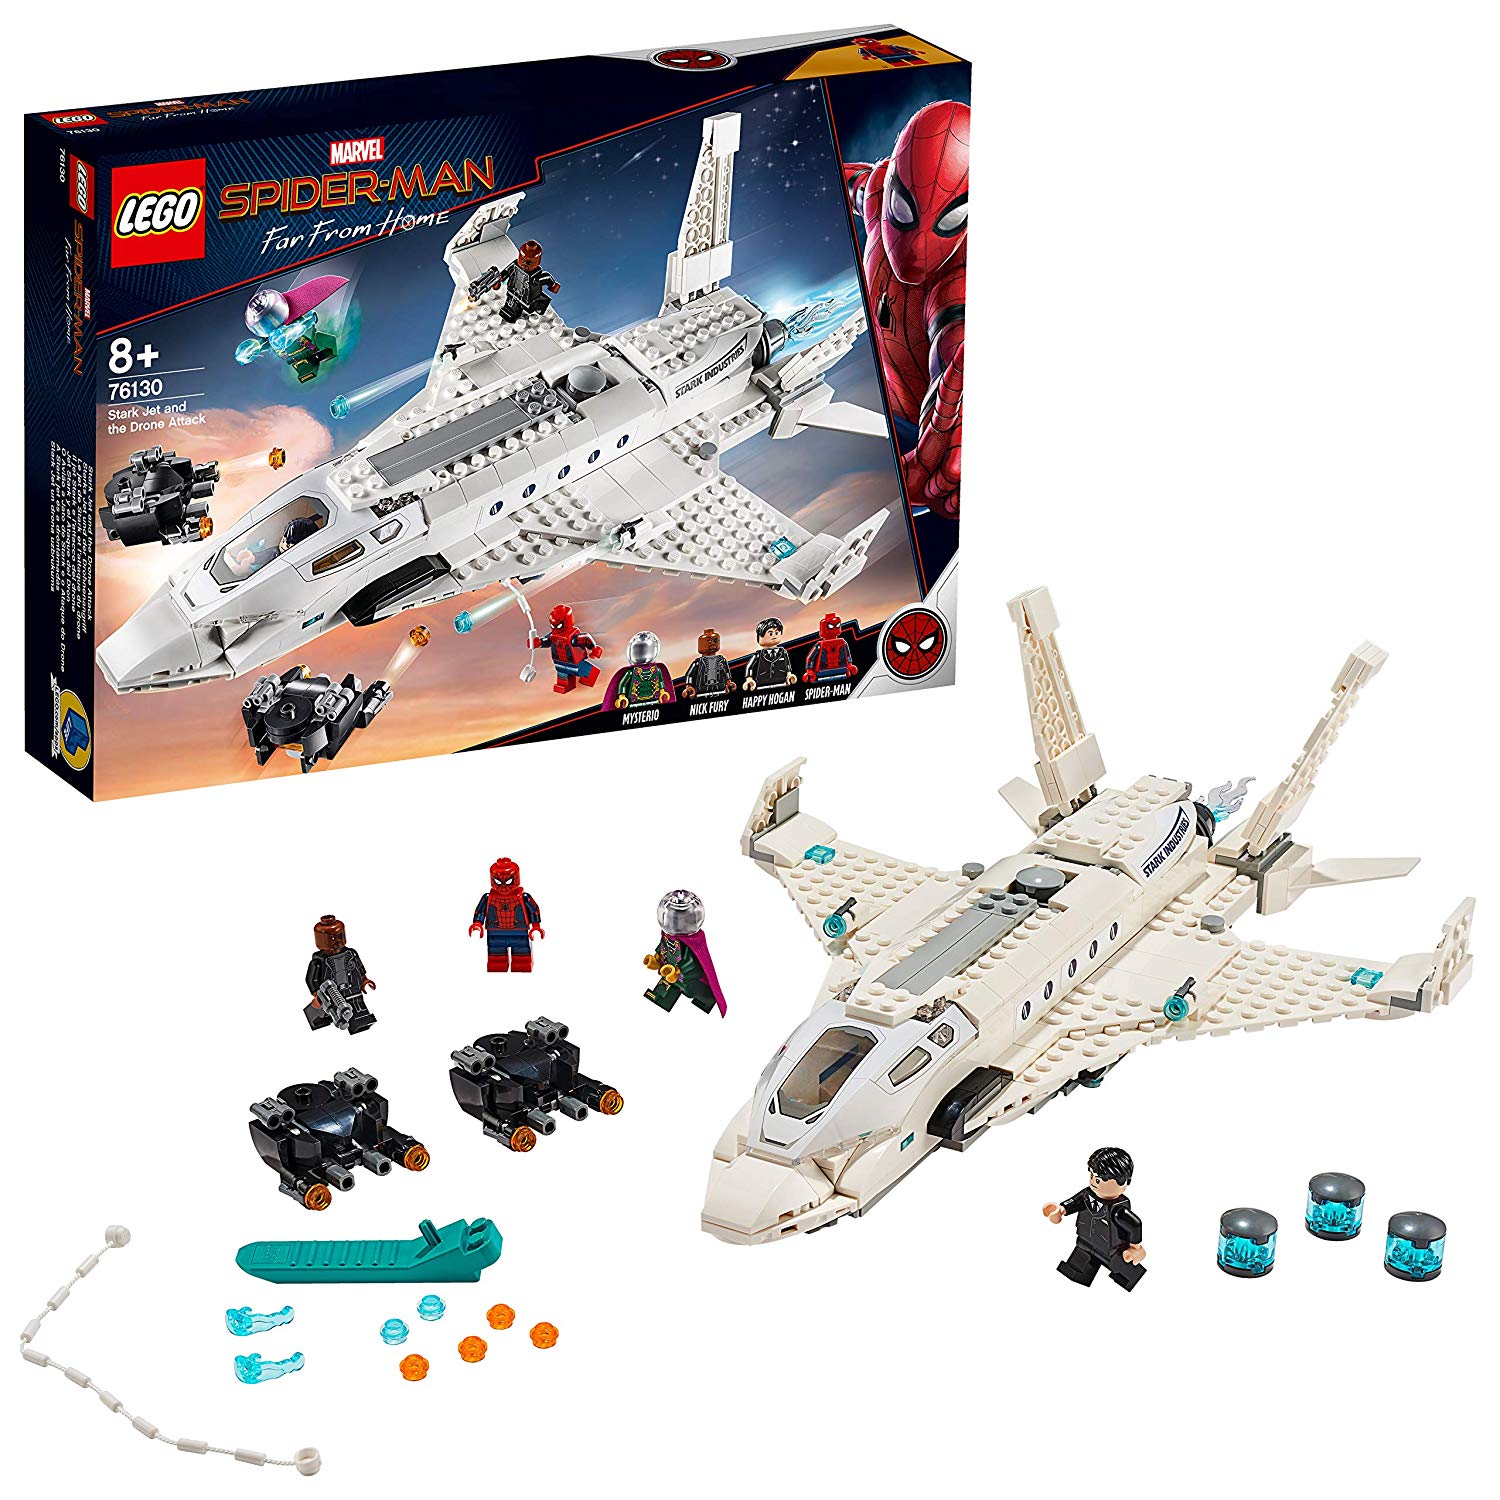 Lego Marvel Spider-Man 76130 - Far From Home Stark Jet And The Drone Attack